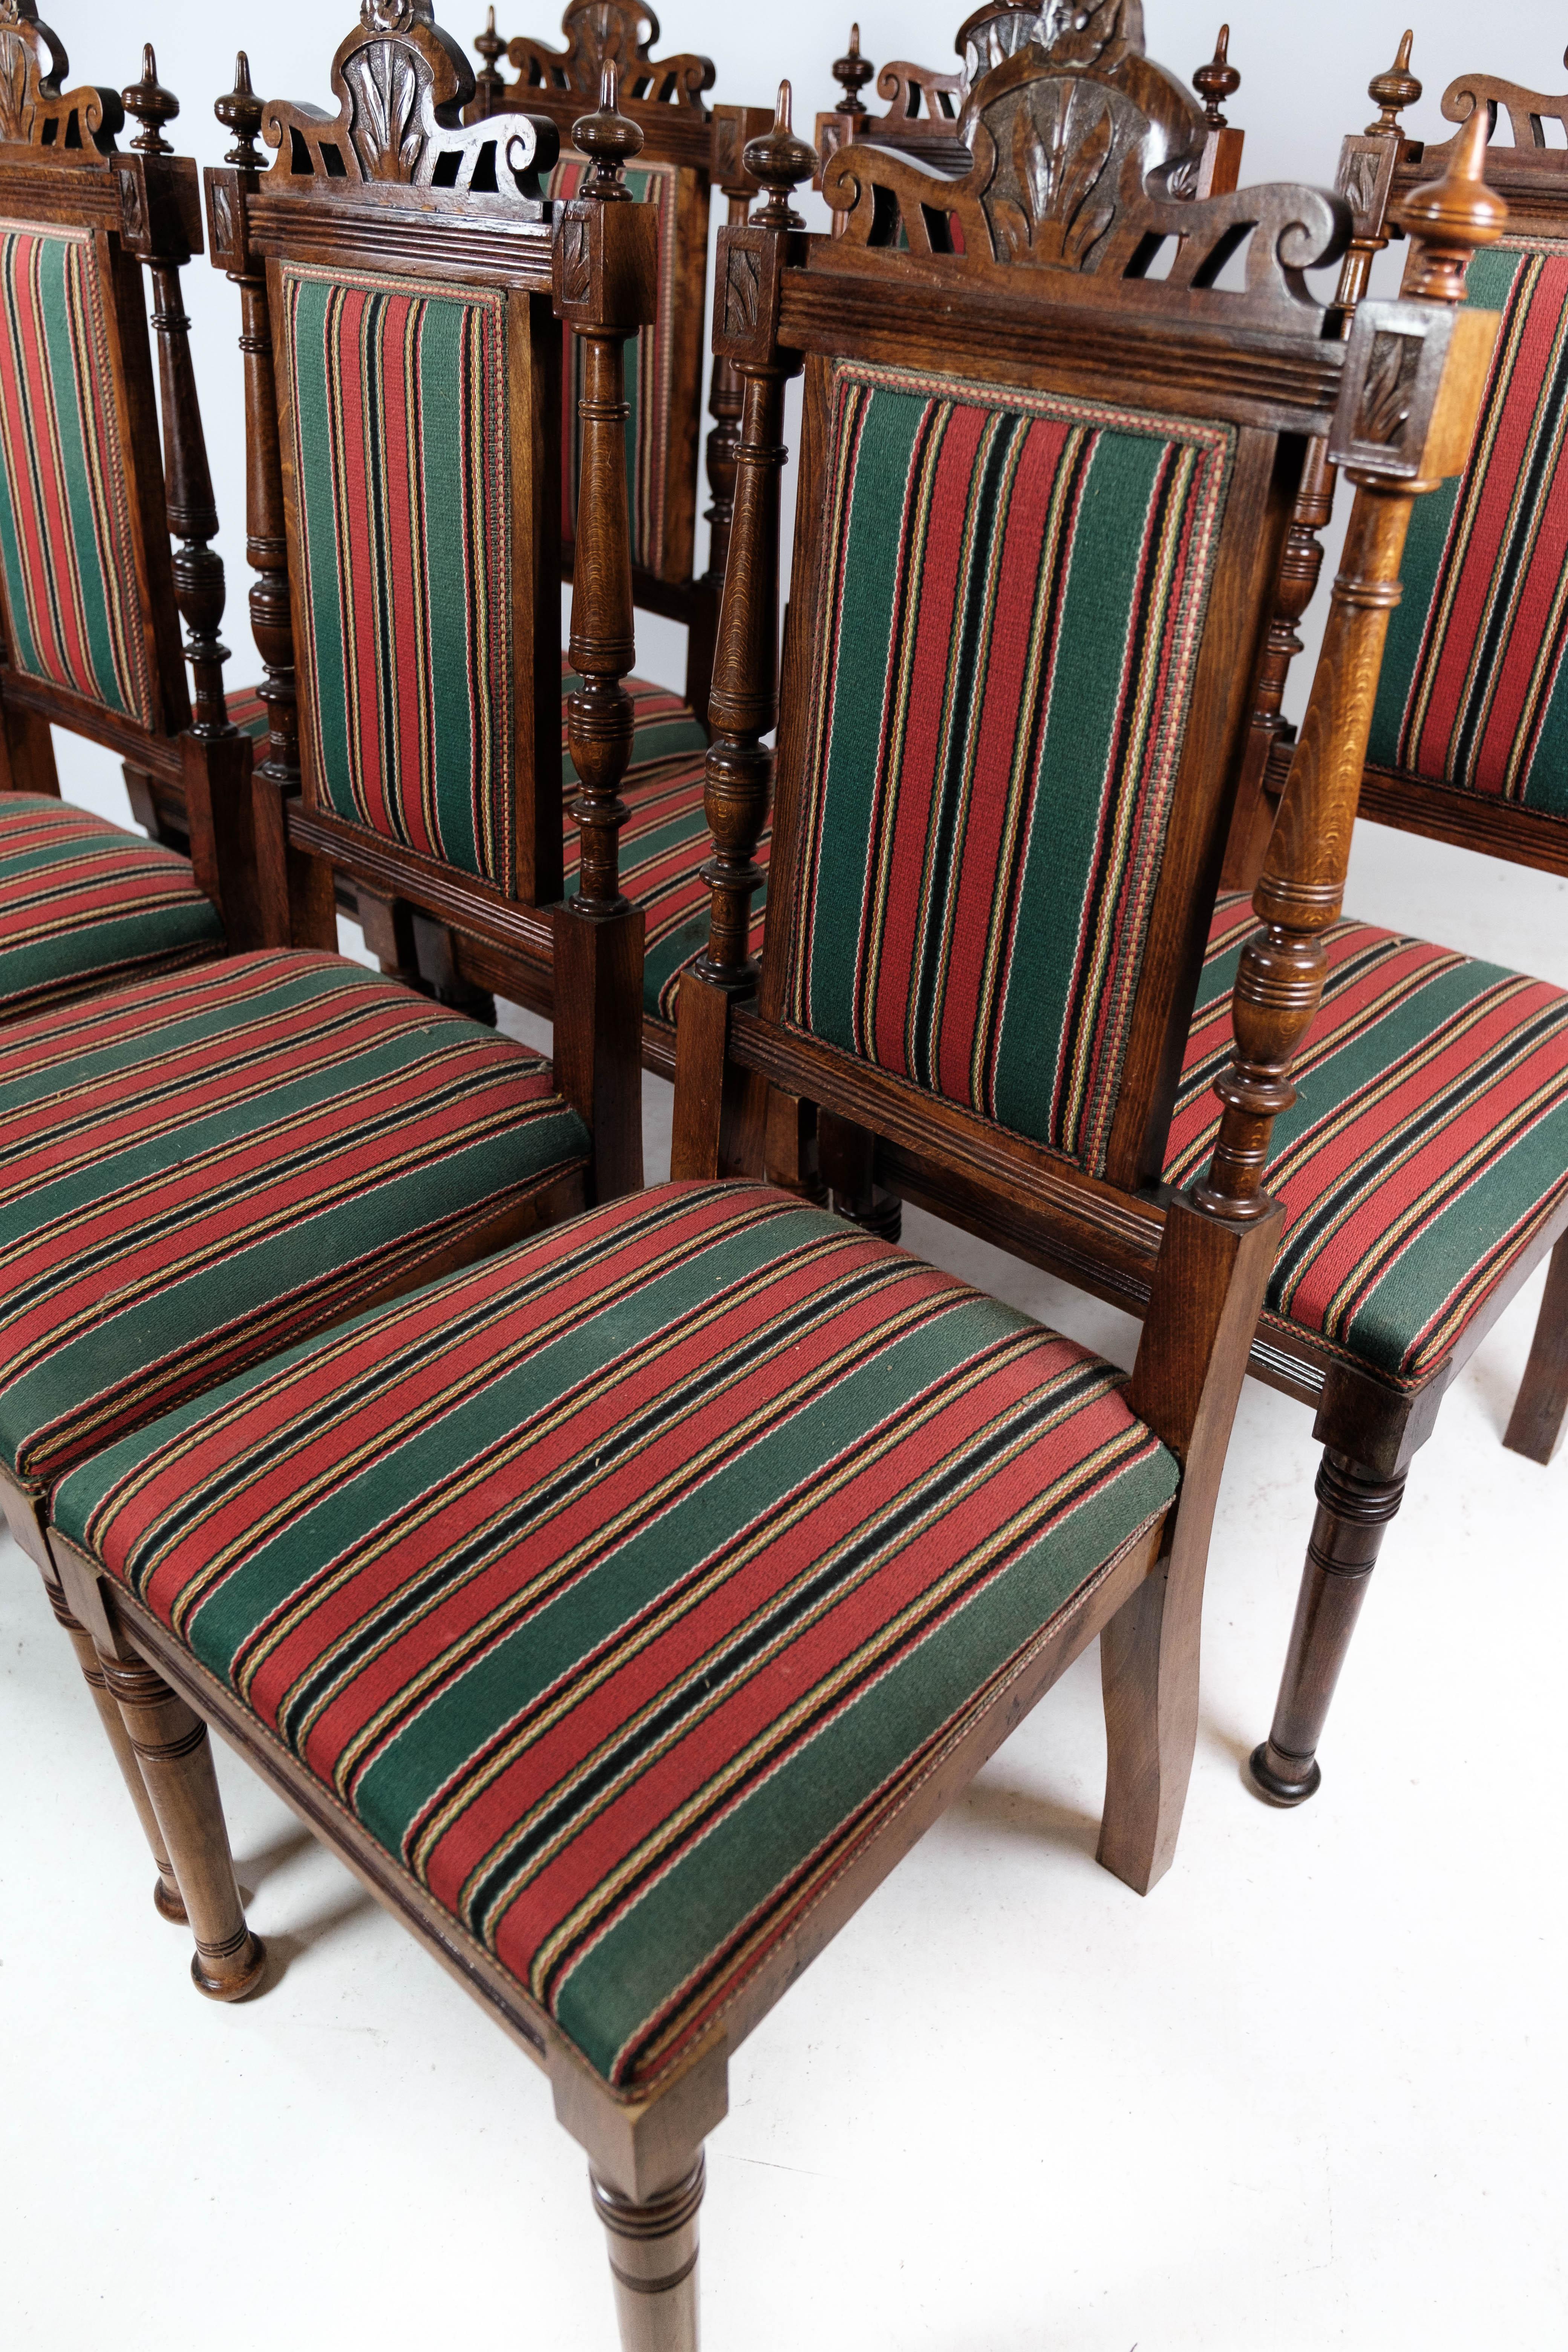 Danish Set of Six Dining Room Chairs of Oak and Upholstered with Striped Fabric, 1920s For Sale